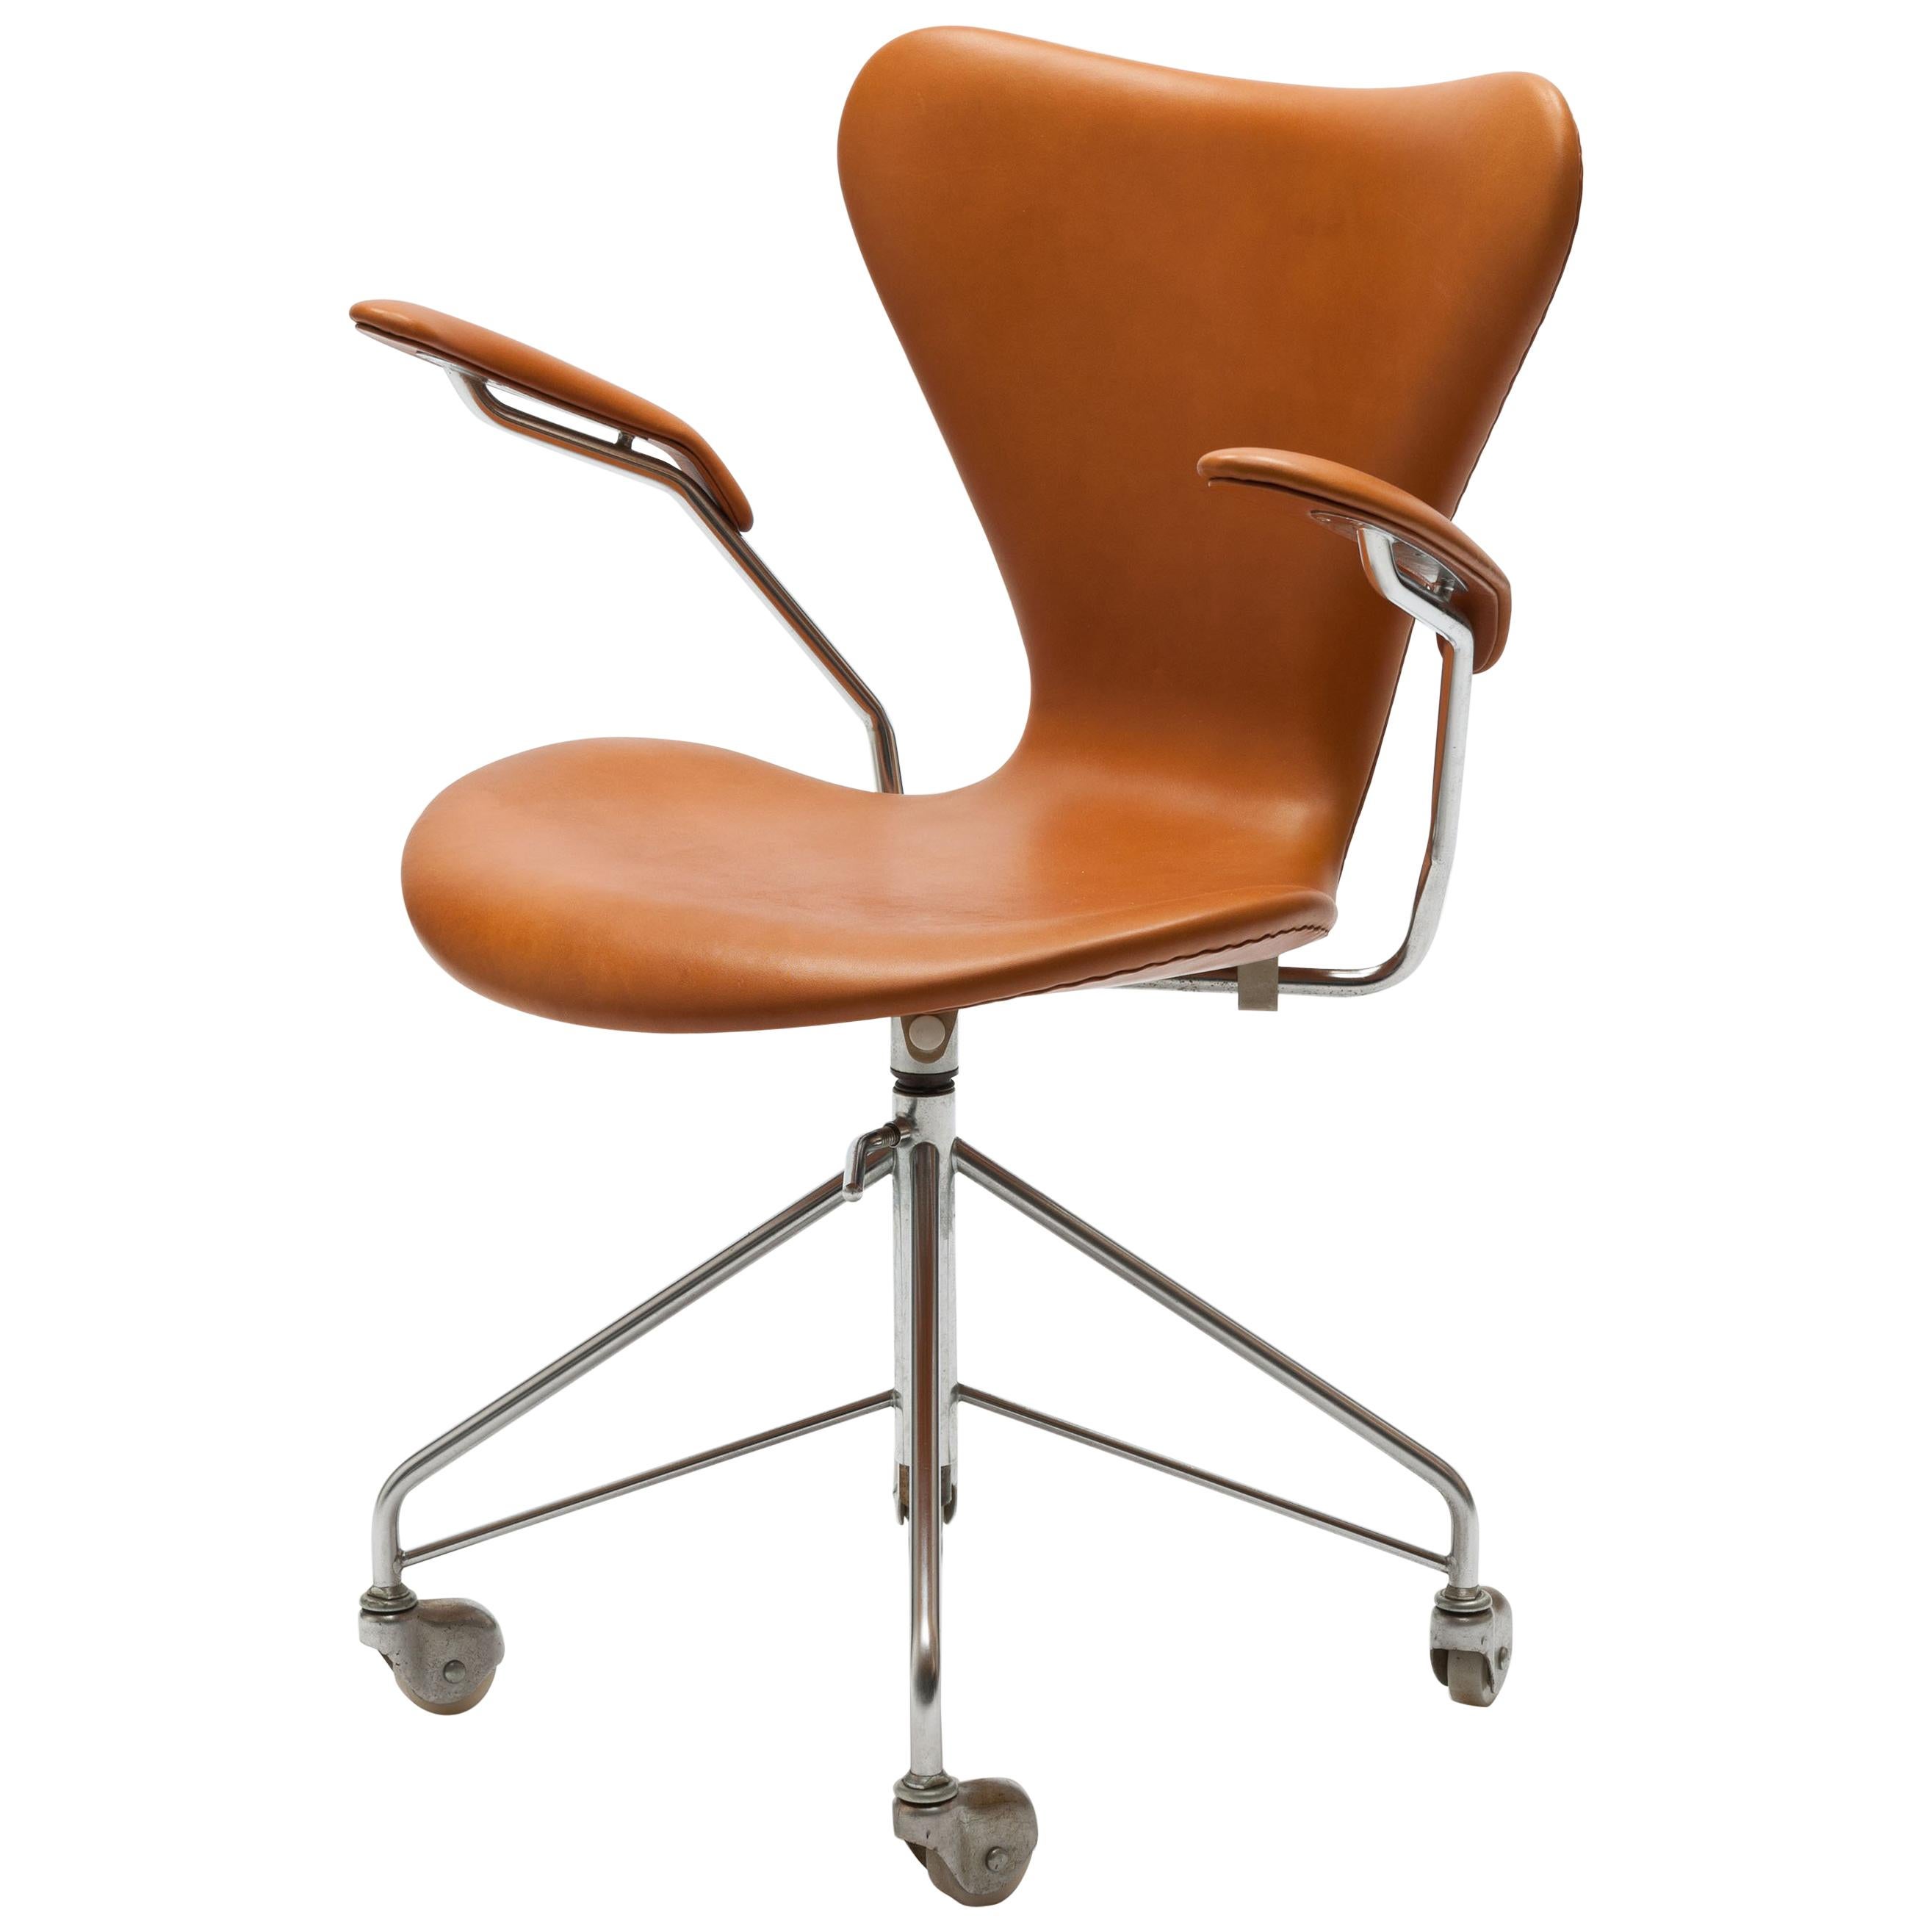 Early Arne Jacobsen Cognac Leather 3217 Swivel Desk Chair with Arms